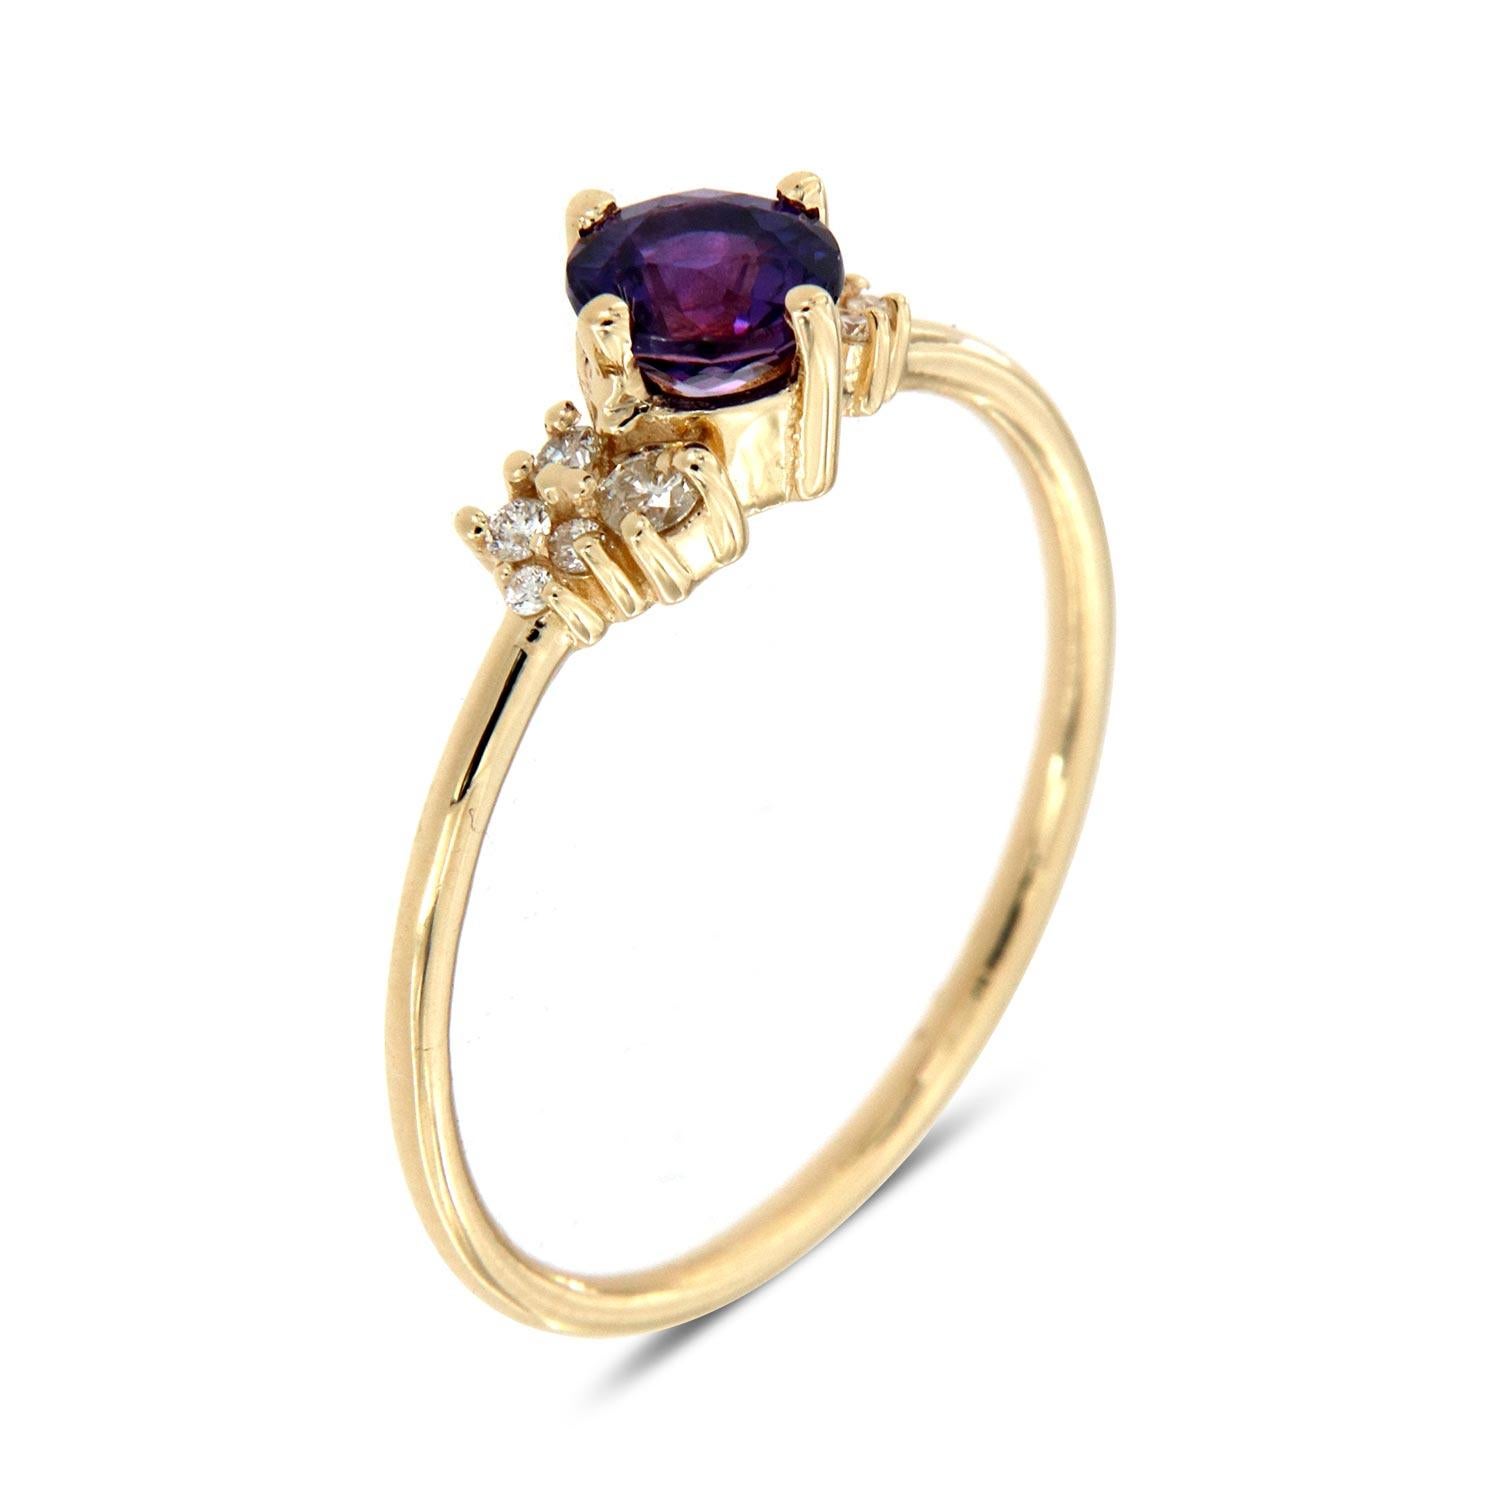 This delicate ring features five(6) round diamonds scattered on top of a 1.2 mm band. The Center Gemstone is a 0.58 Carat Round Natural Purple Sapphire from Sri-Lank set in tiny prongs that enhance this ring's organic and earthy look. Experience the